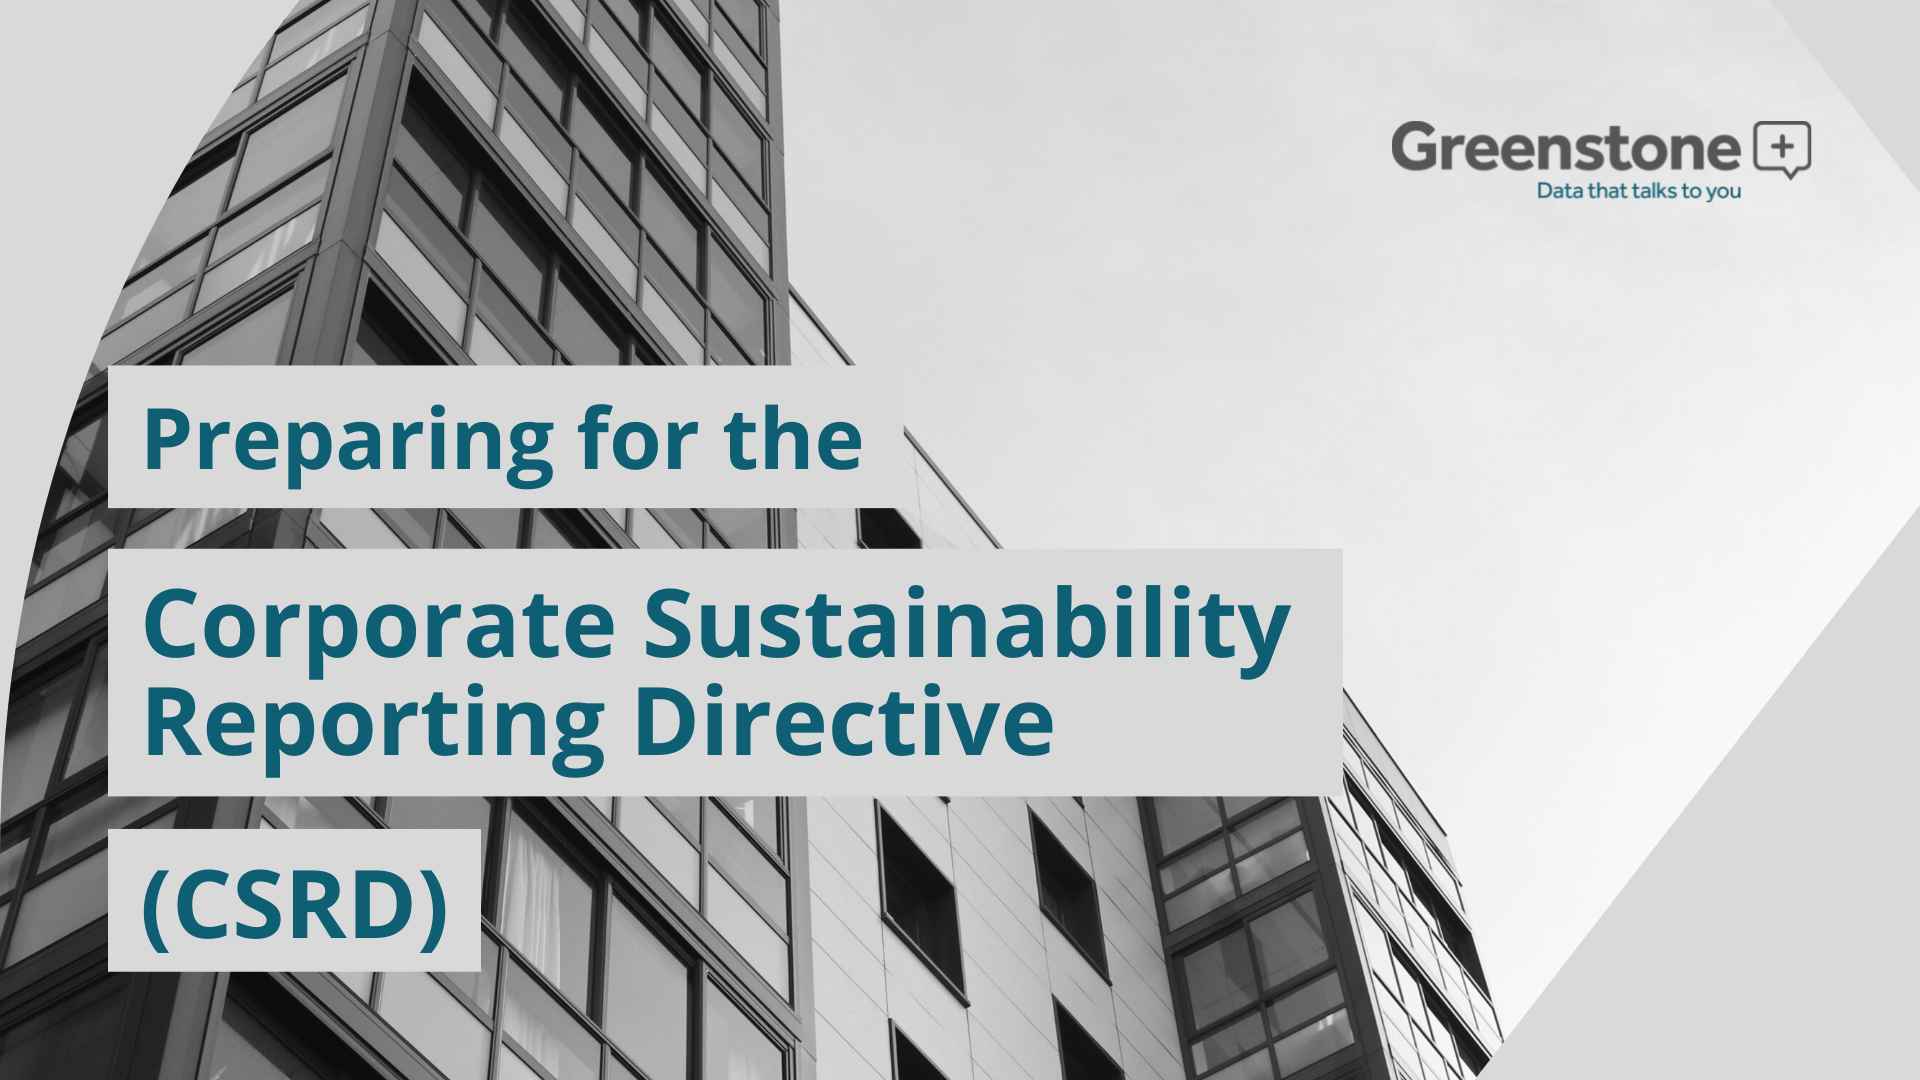 Preparing for the Corporate Sustainability Reporting Directive (CSRD)